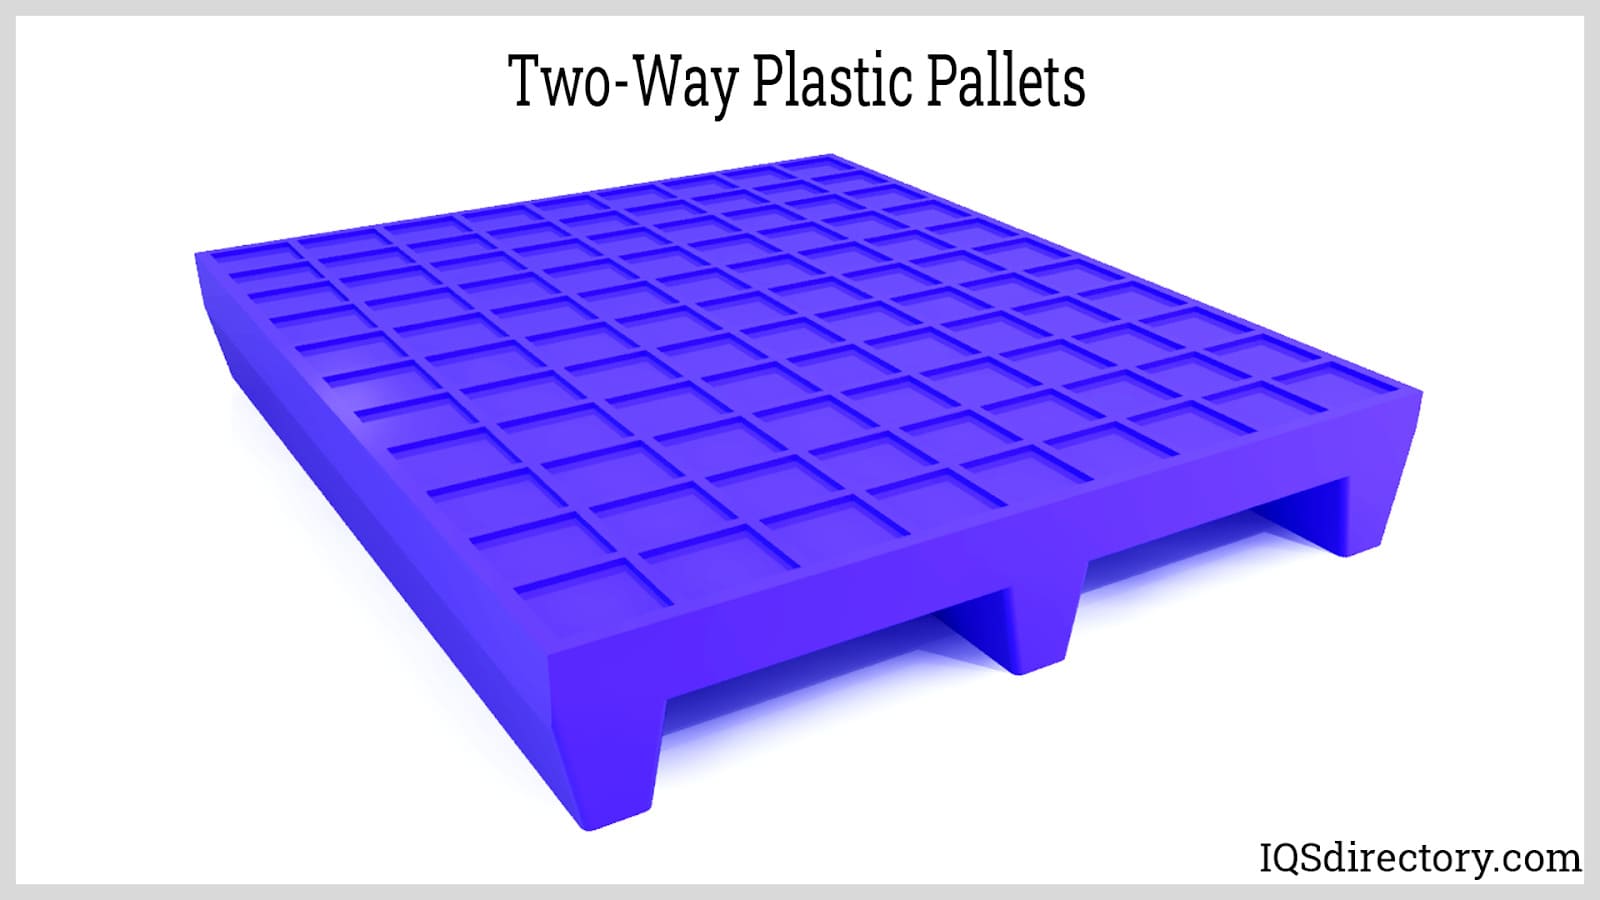  Two-Way Plastic Pallets